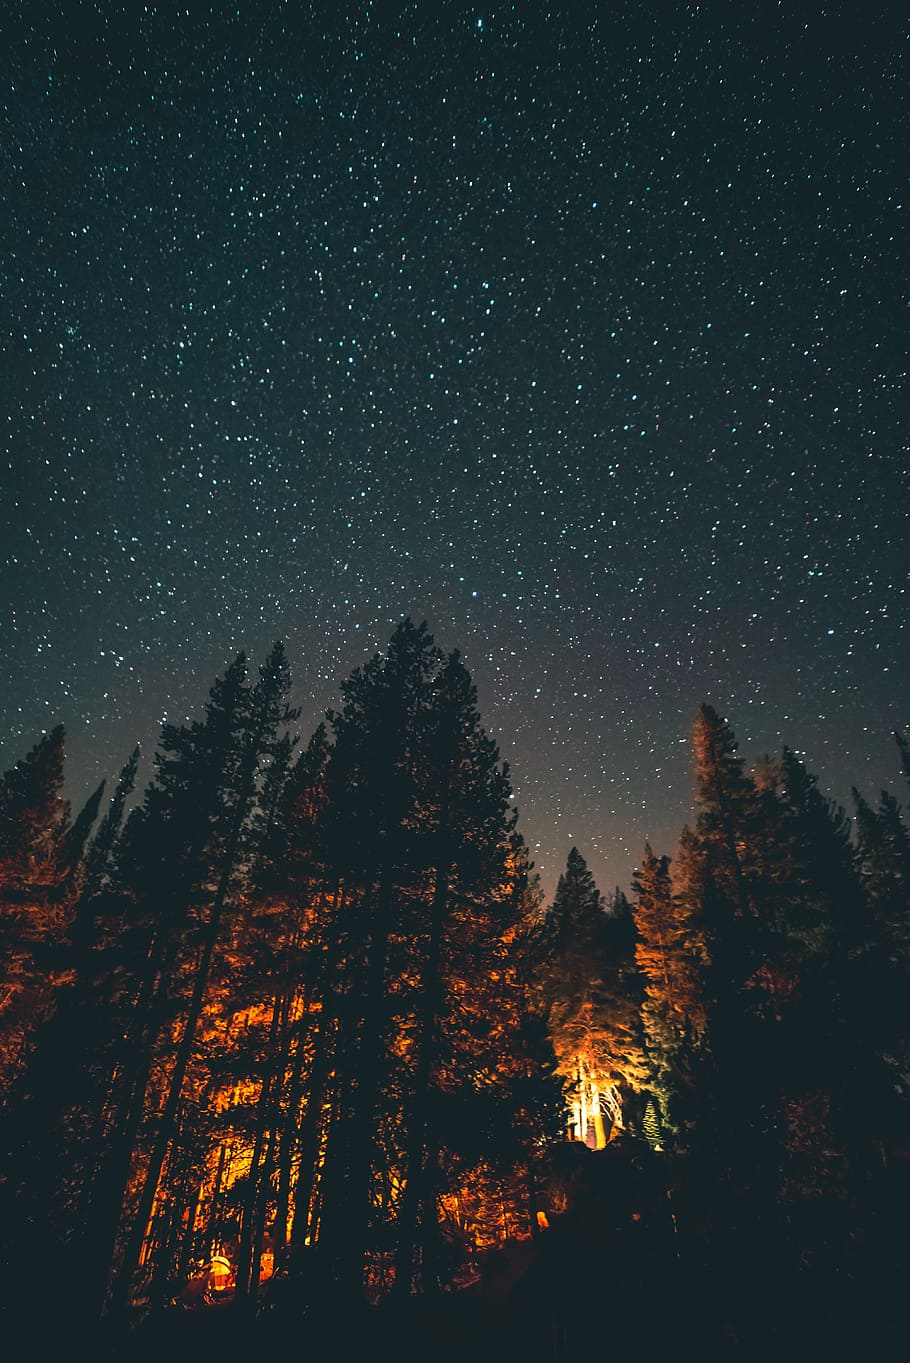 Under the stars 1080P, 2K, 4K, 5K HD wallpapers free download | Wallpaper  Flare